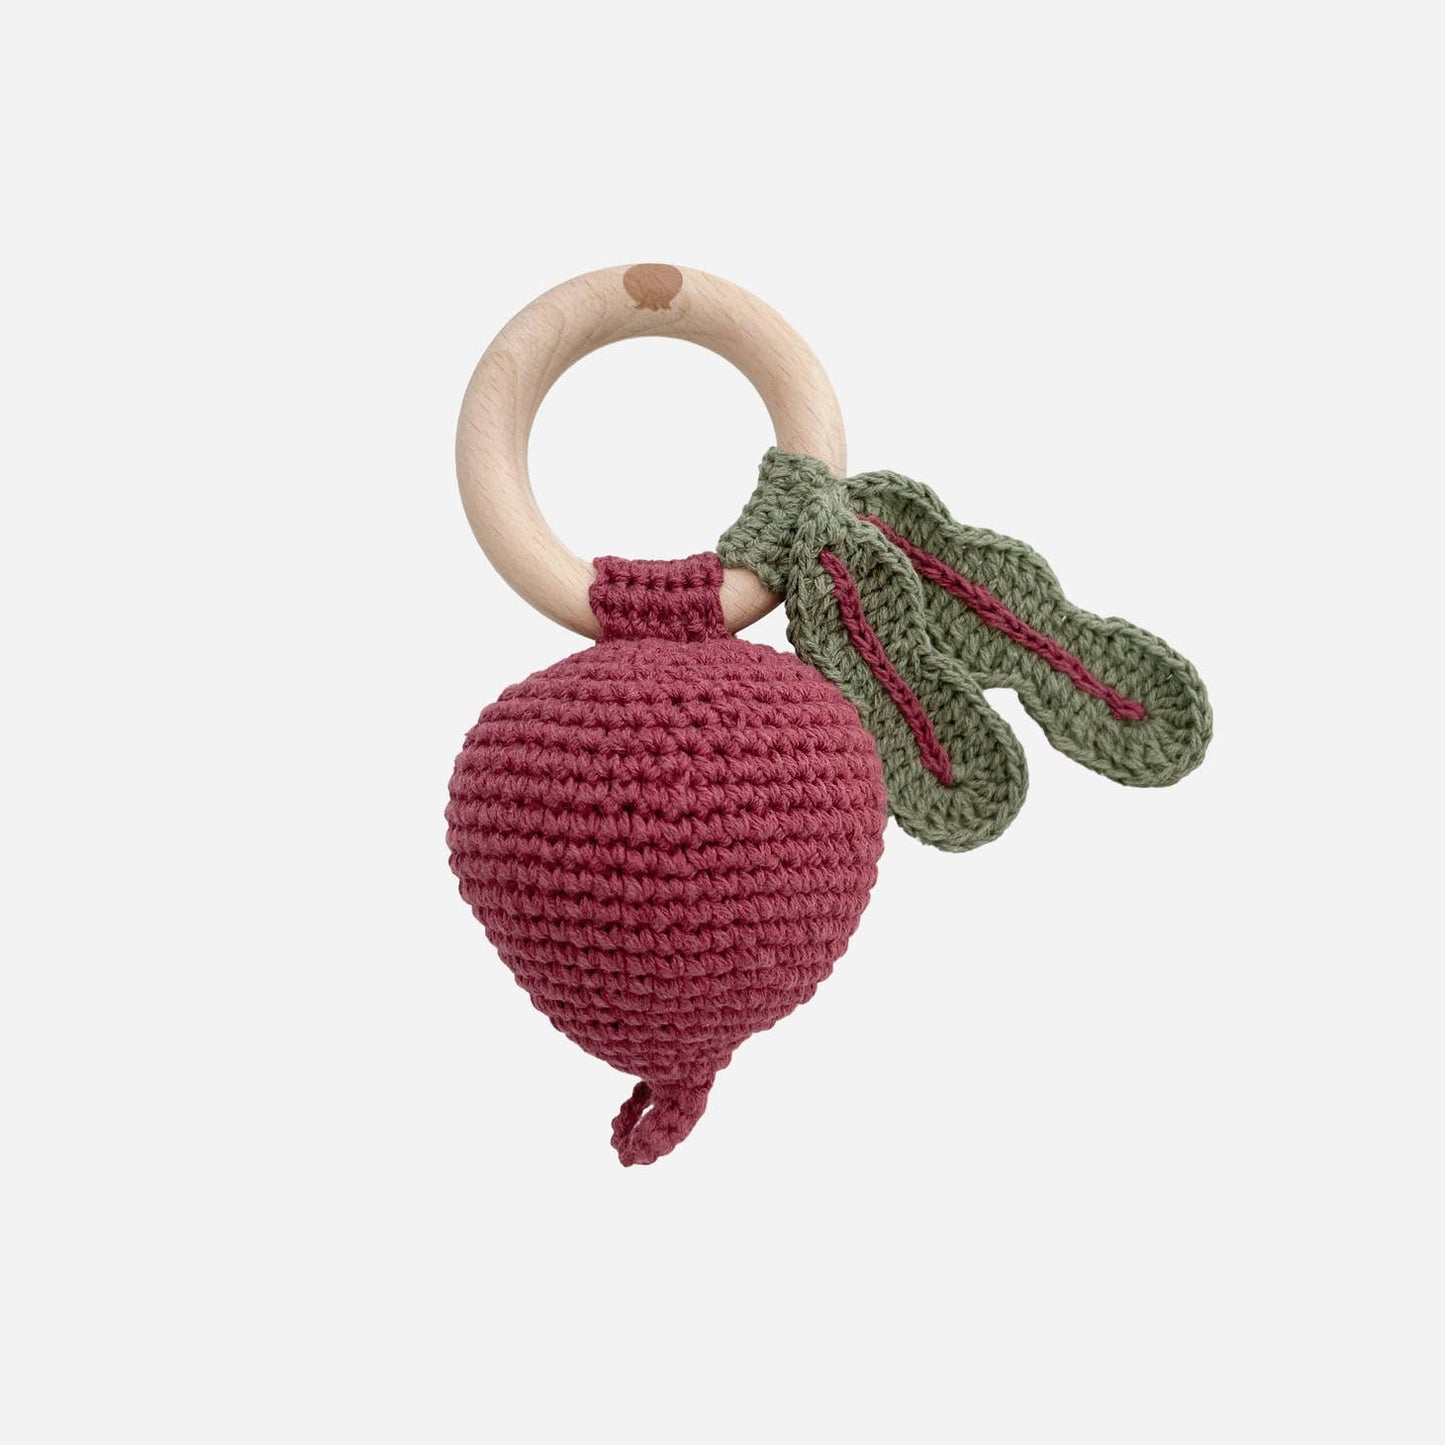 The Blueberry Hill crochet rattle teether